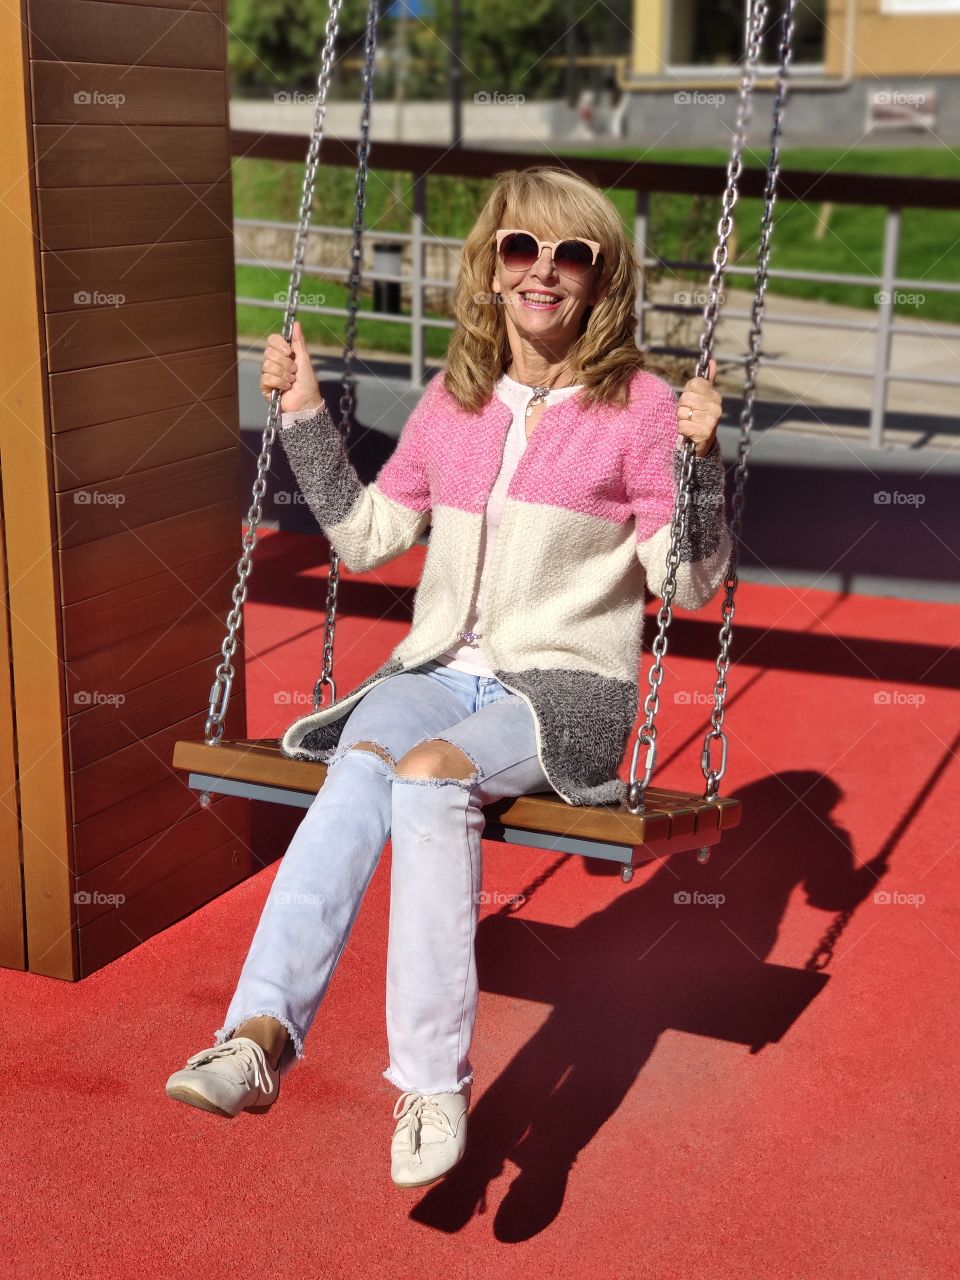 Lady on the swing